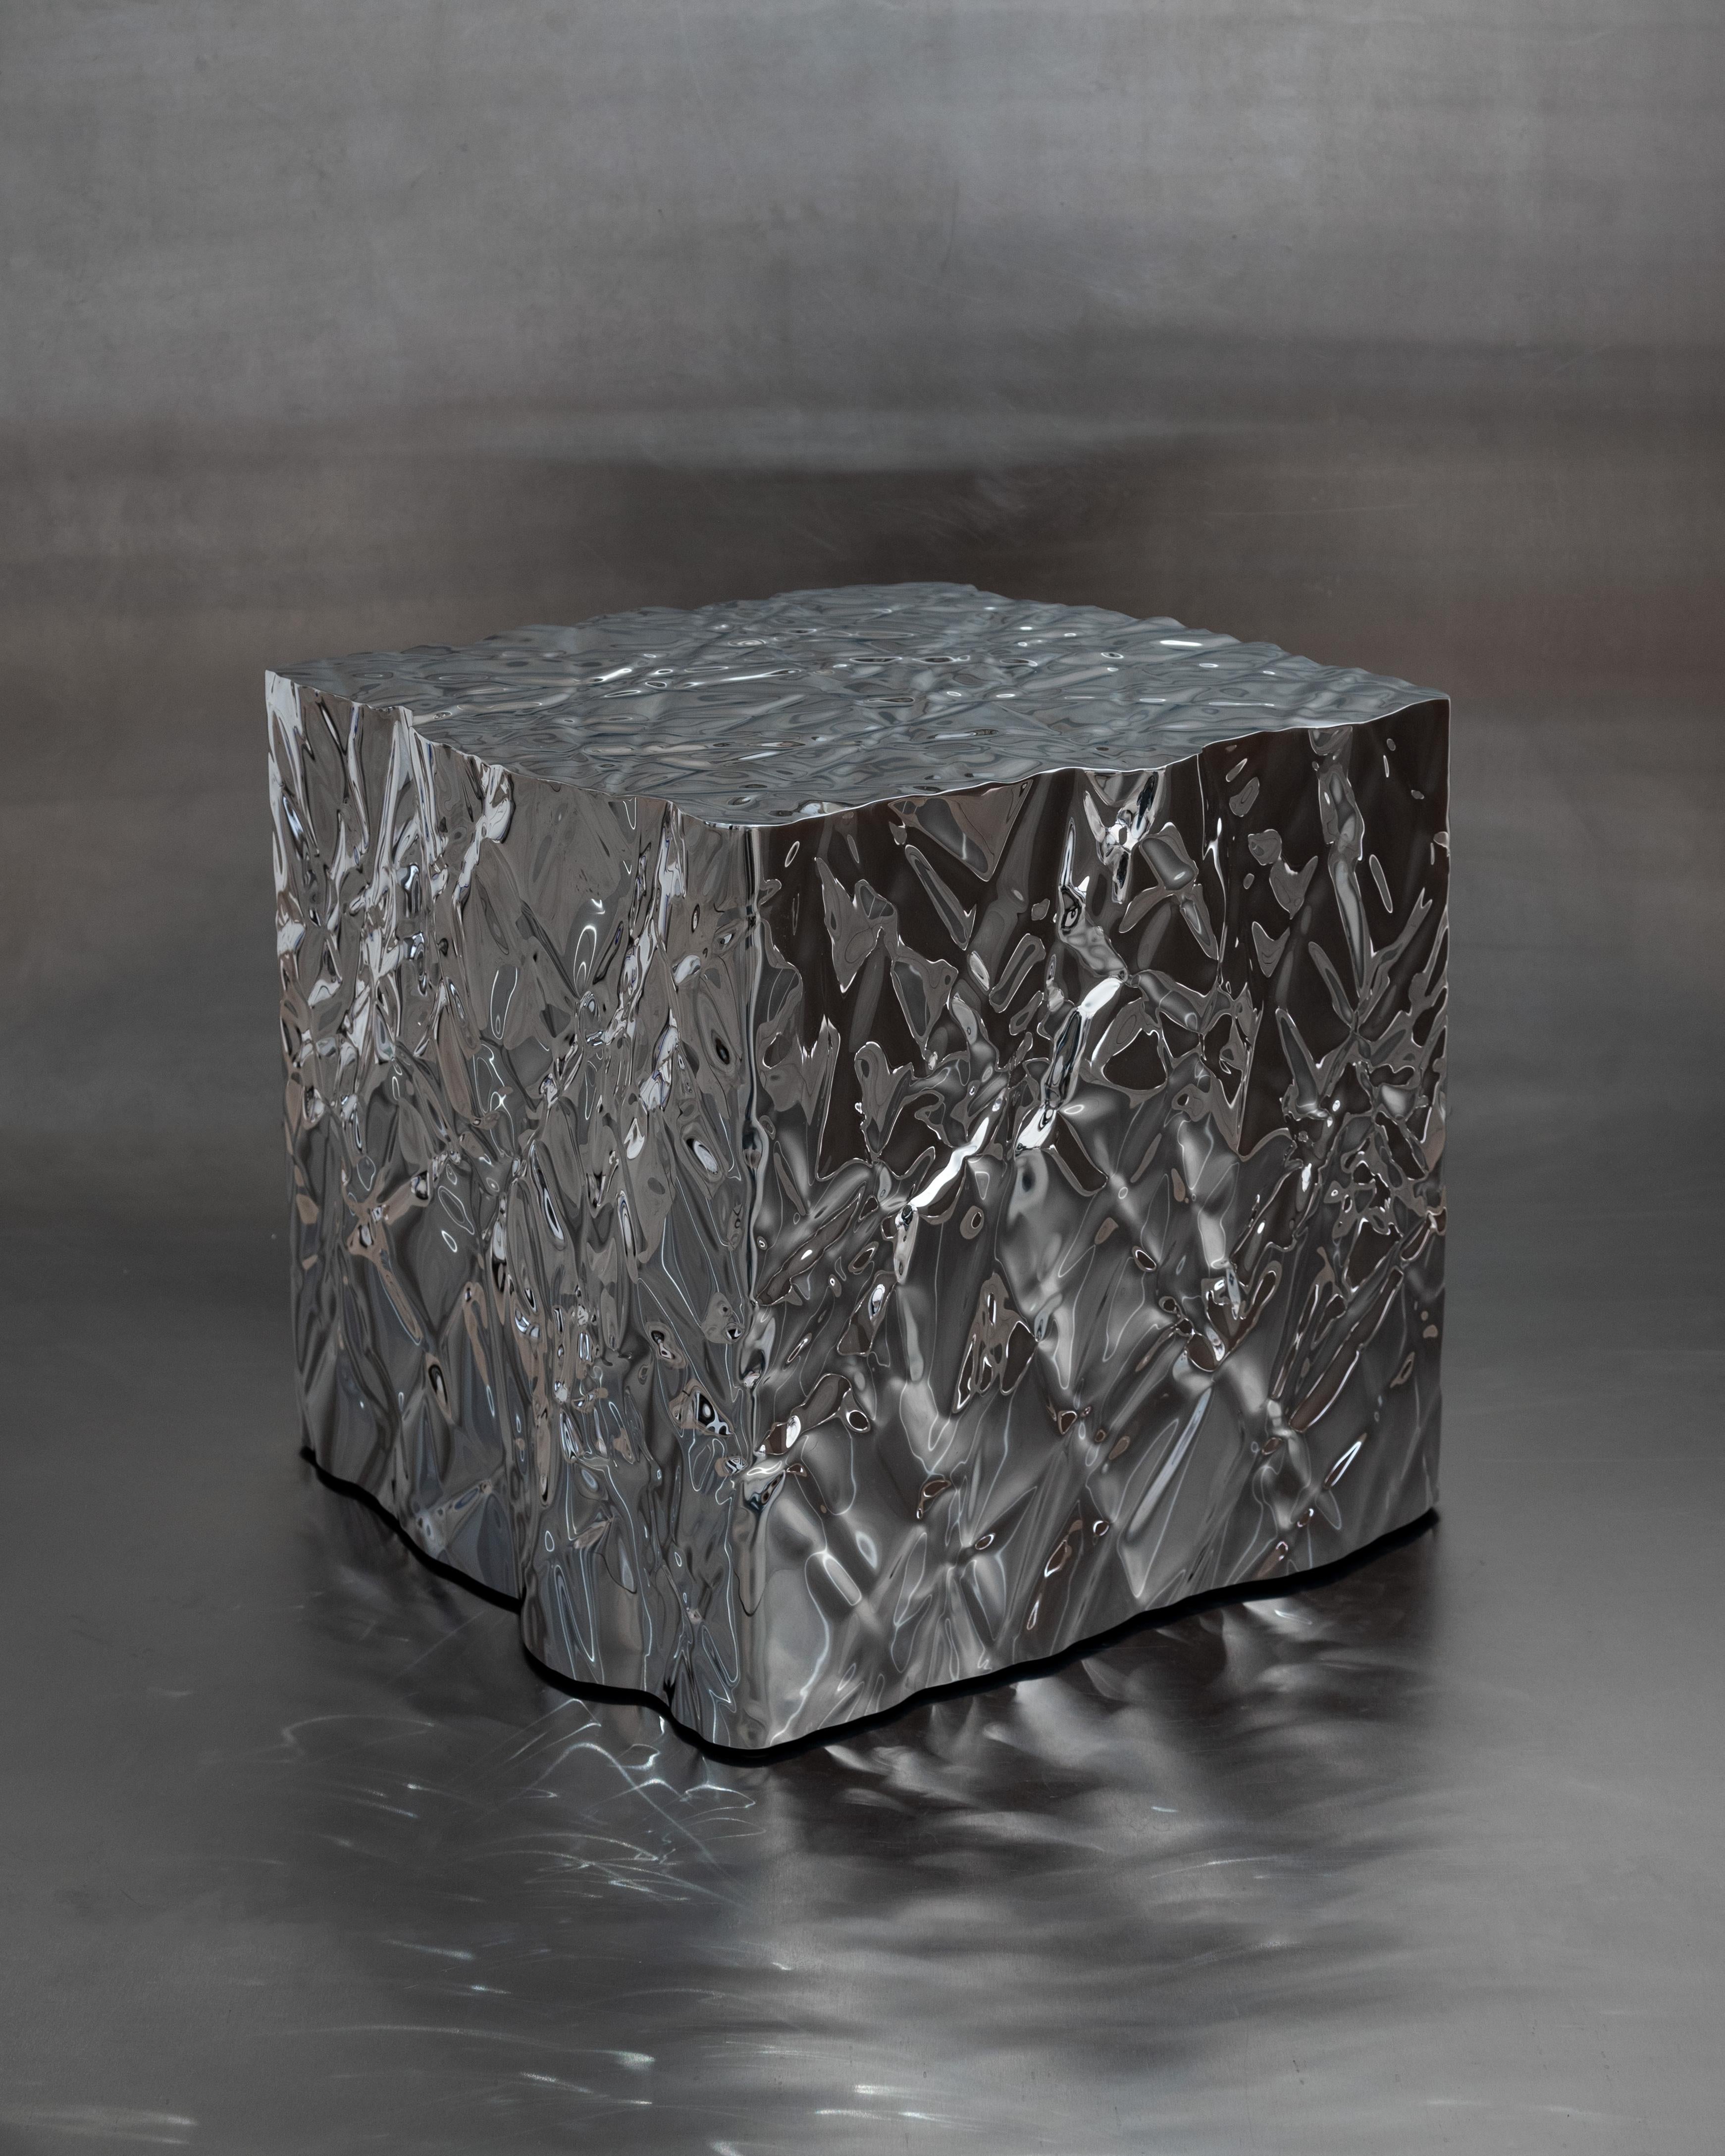 Wrinkled steel cube side table by Omaha-based designer Christopher Prinz, who achieves this unusual texture by repeatedly creasing a thin sheet of steel, resulting in a strong, rigid, and unique form. Hidden leveling feet protect surfaces and ensure